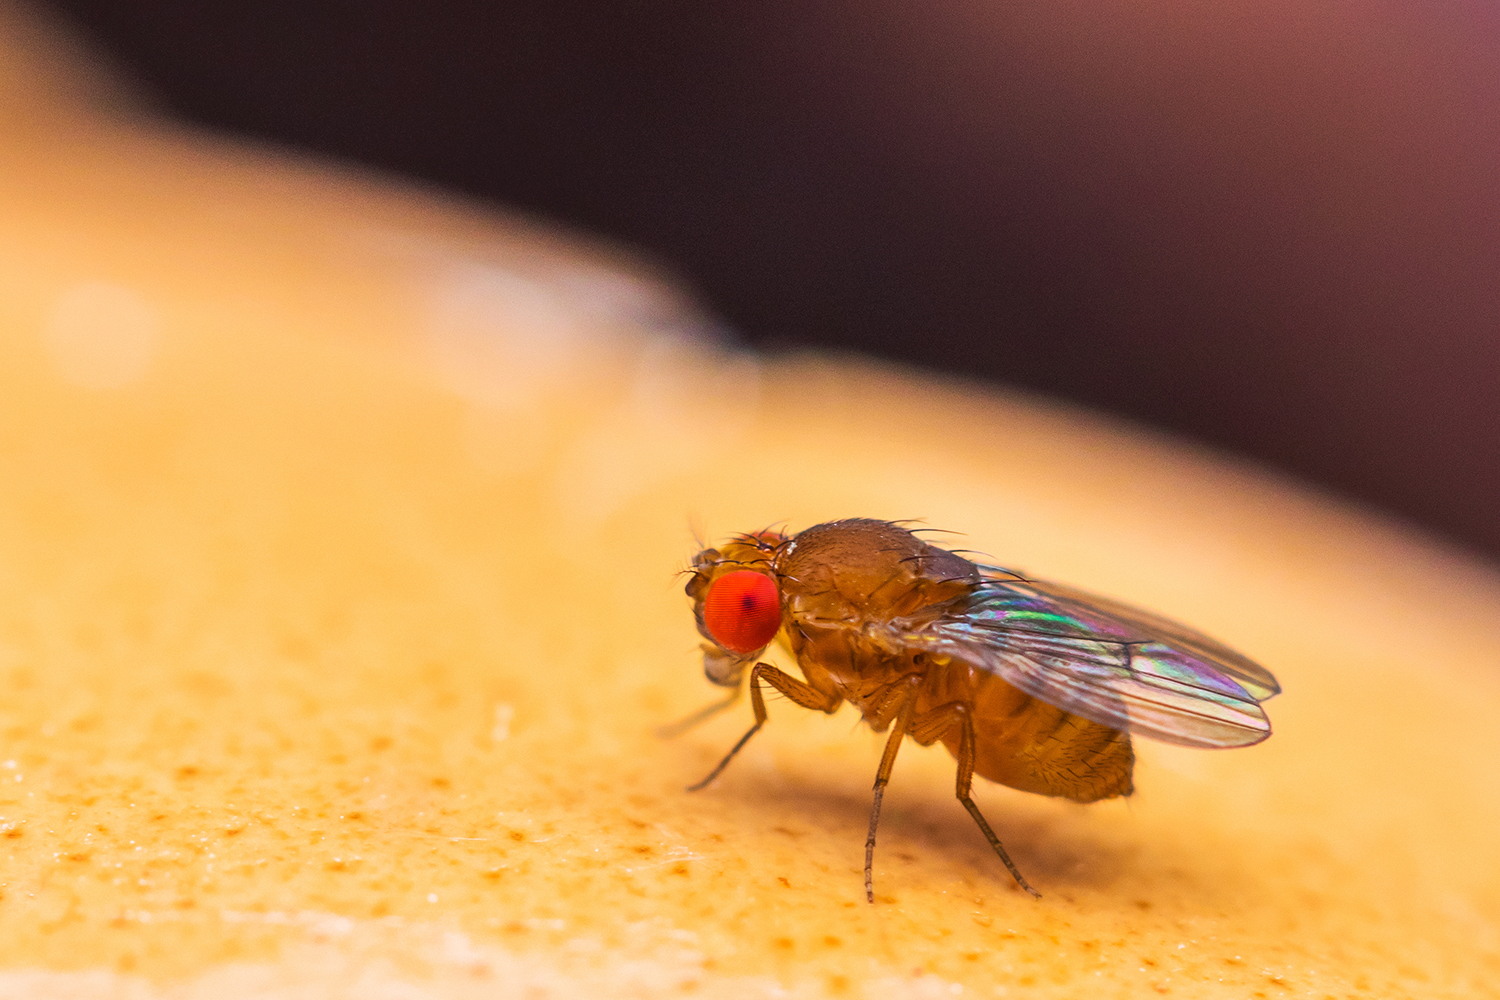 Close up shot of a fruit fly on an orange.